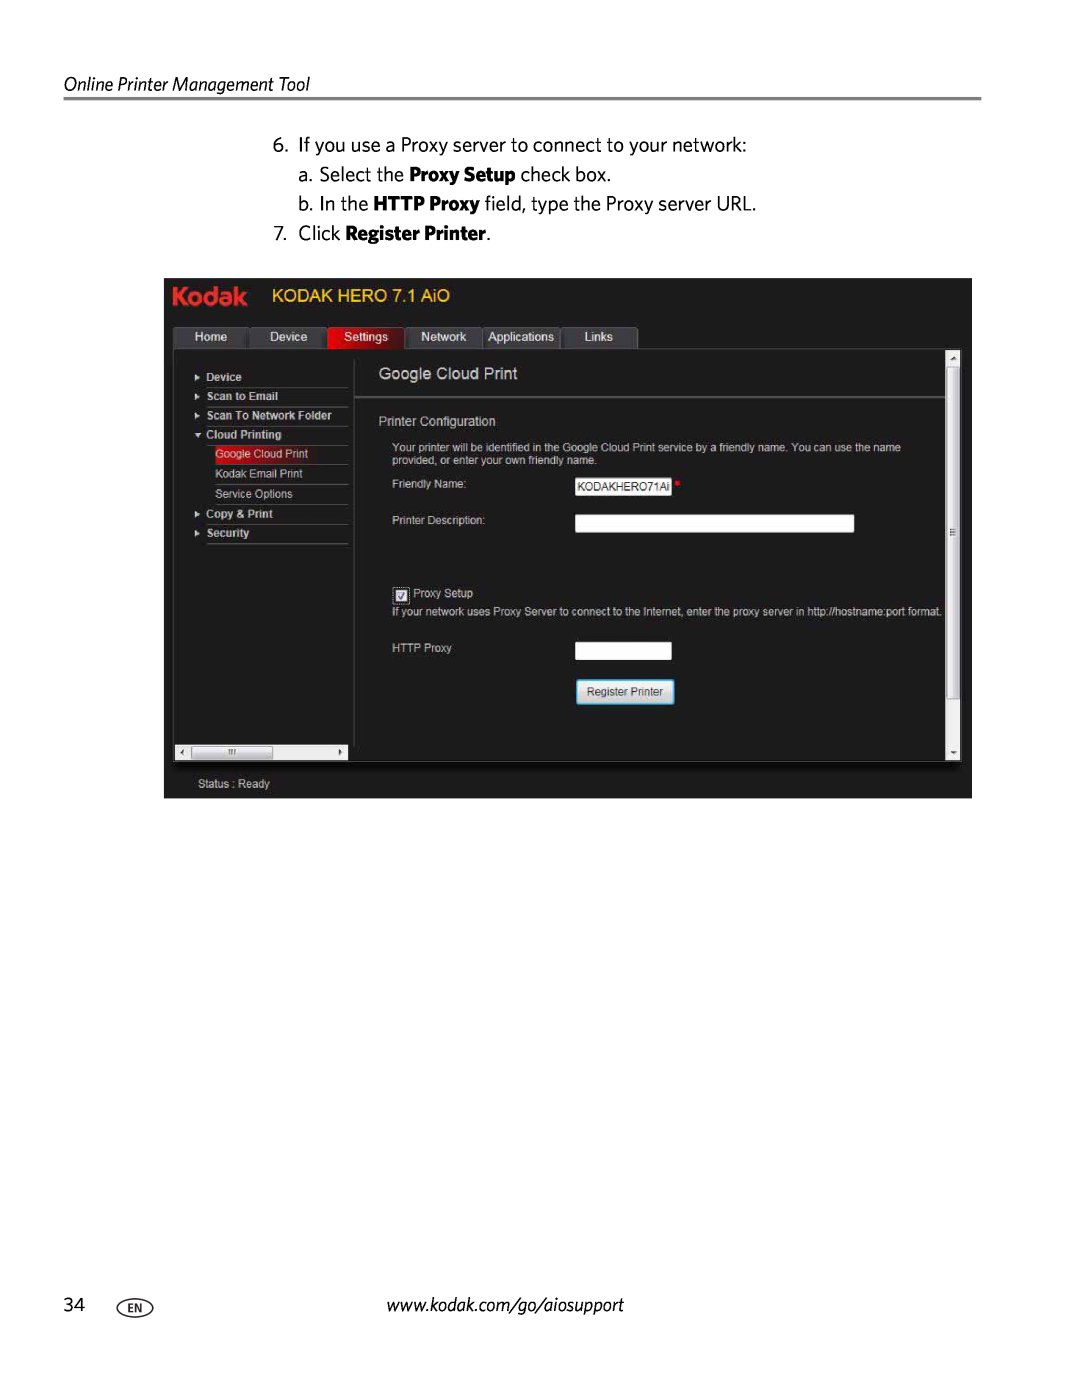 Kodak 7.1 Click Register Printer, If you use a Proxy server to connect to your network, Online Printer Management Tool 